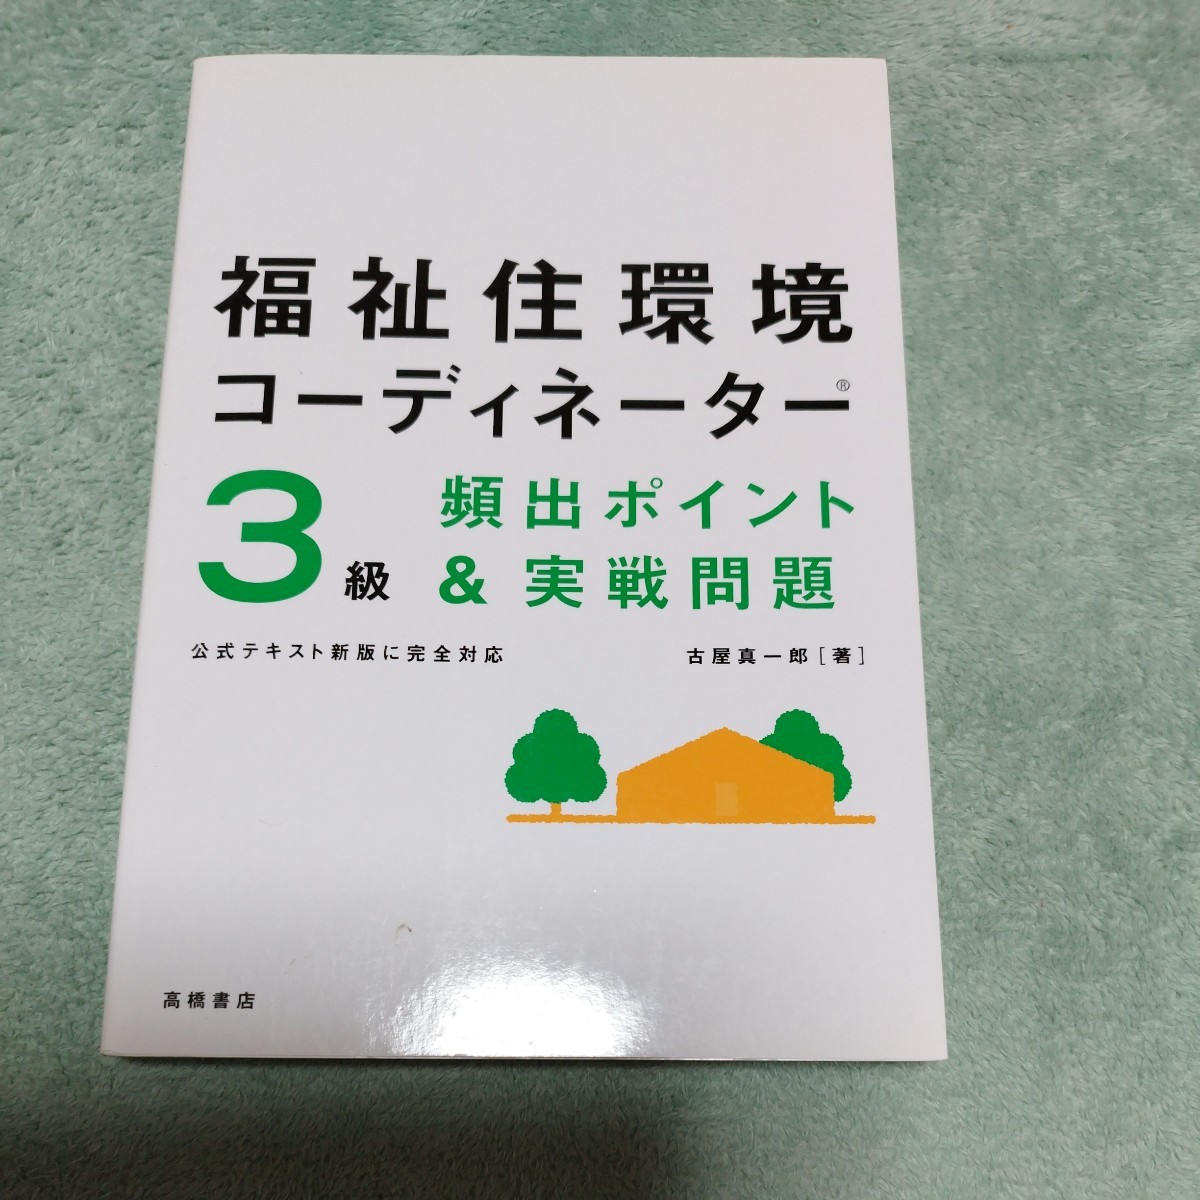  welfare . environment ko-tine-ta-3 class .. Point & practice problem height . bookstore body 1100 jpy 2010 year 7/30 issue 